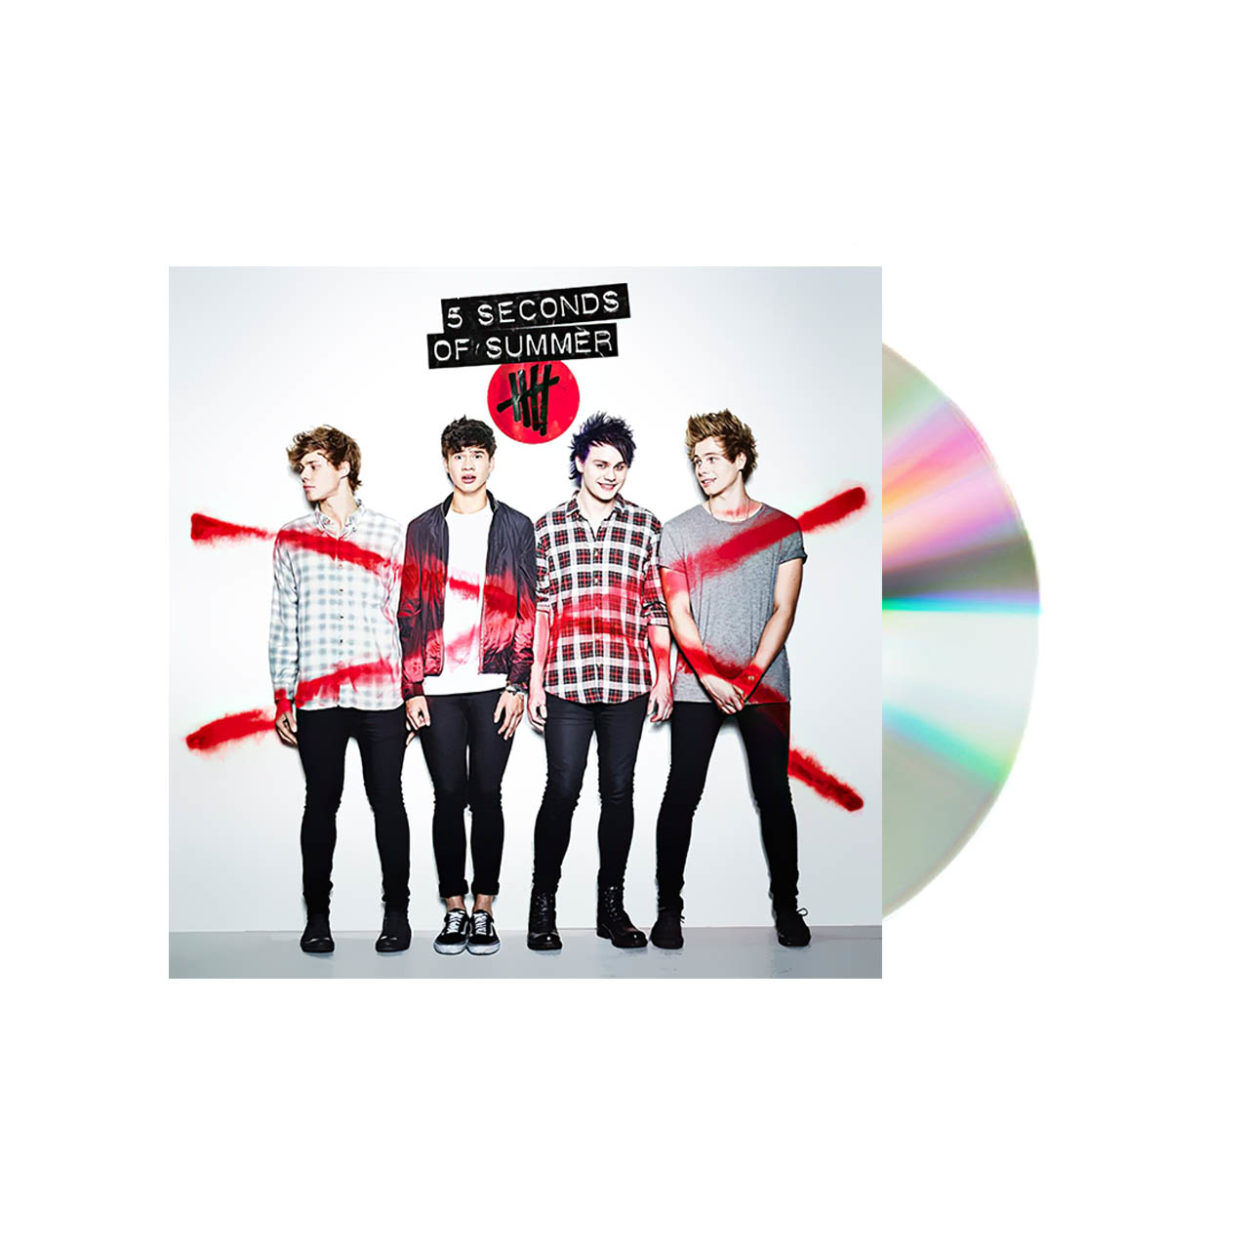 5 Seconds of summer self titled cd